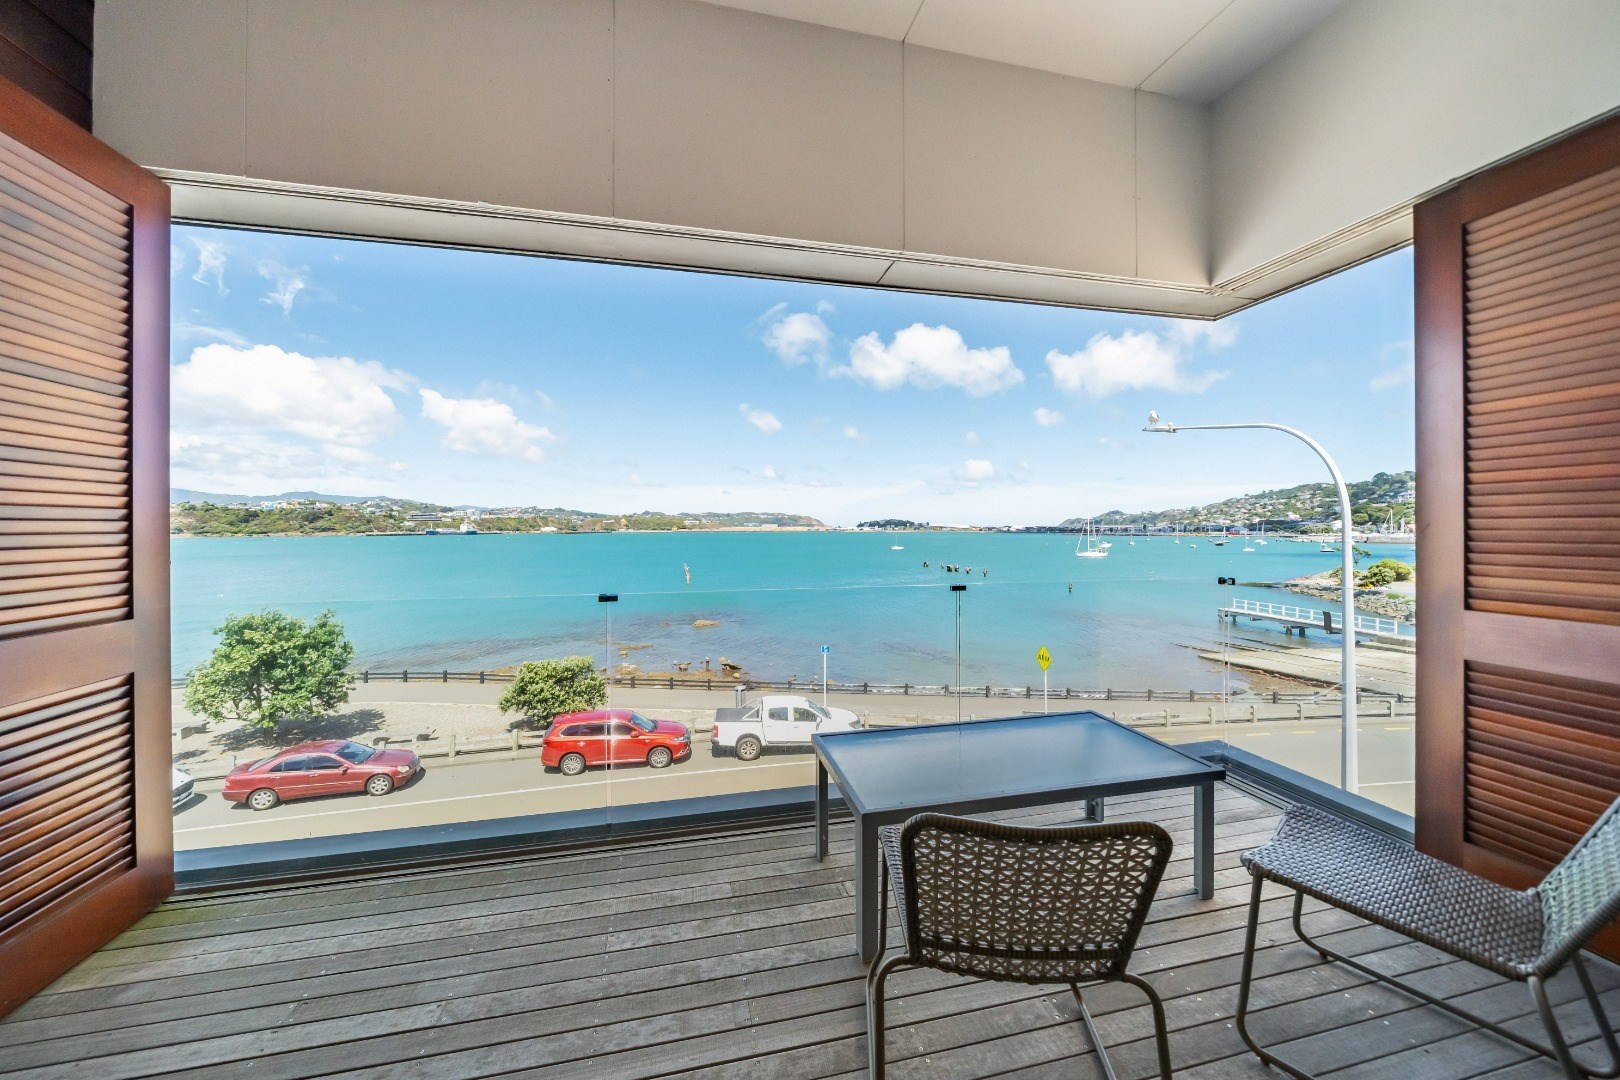 Real Estate For Rent Houses & Apartments : Fully Furnished Apartment Evans Bay Parade, Wellington